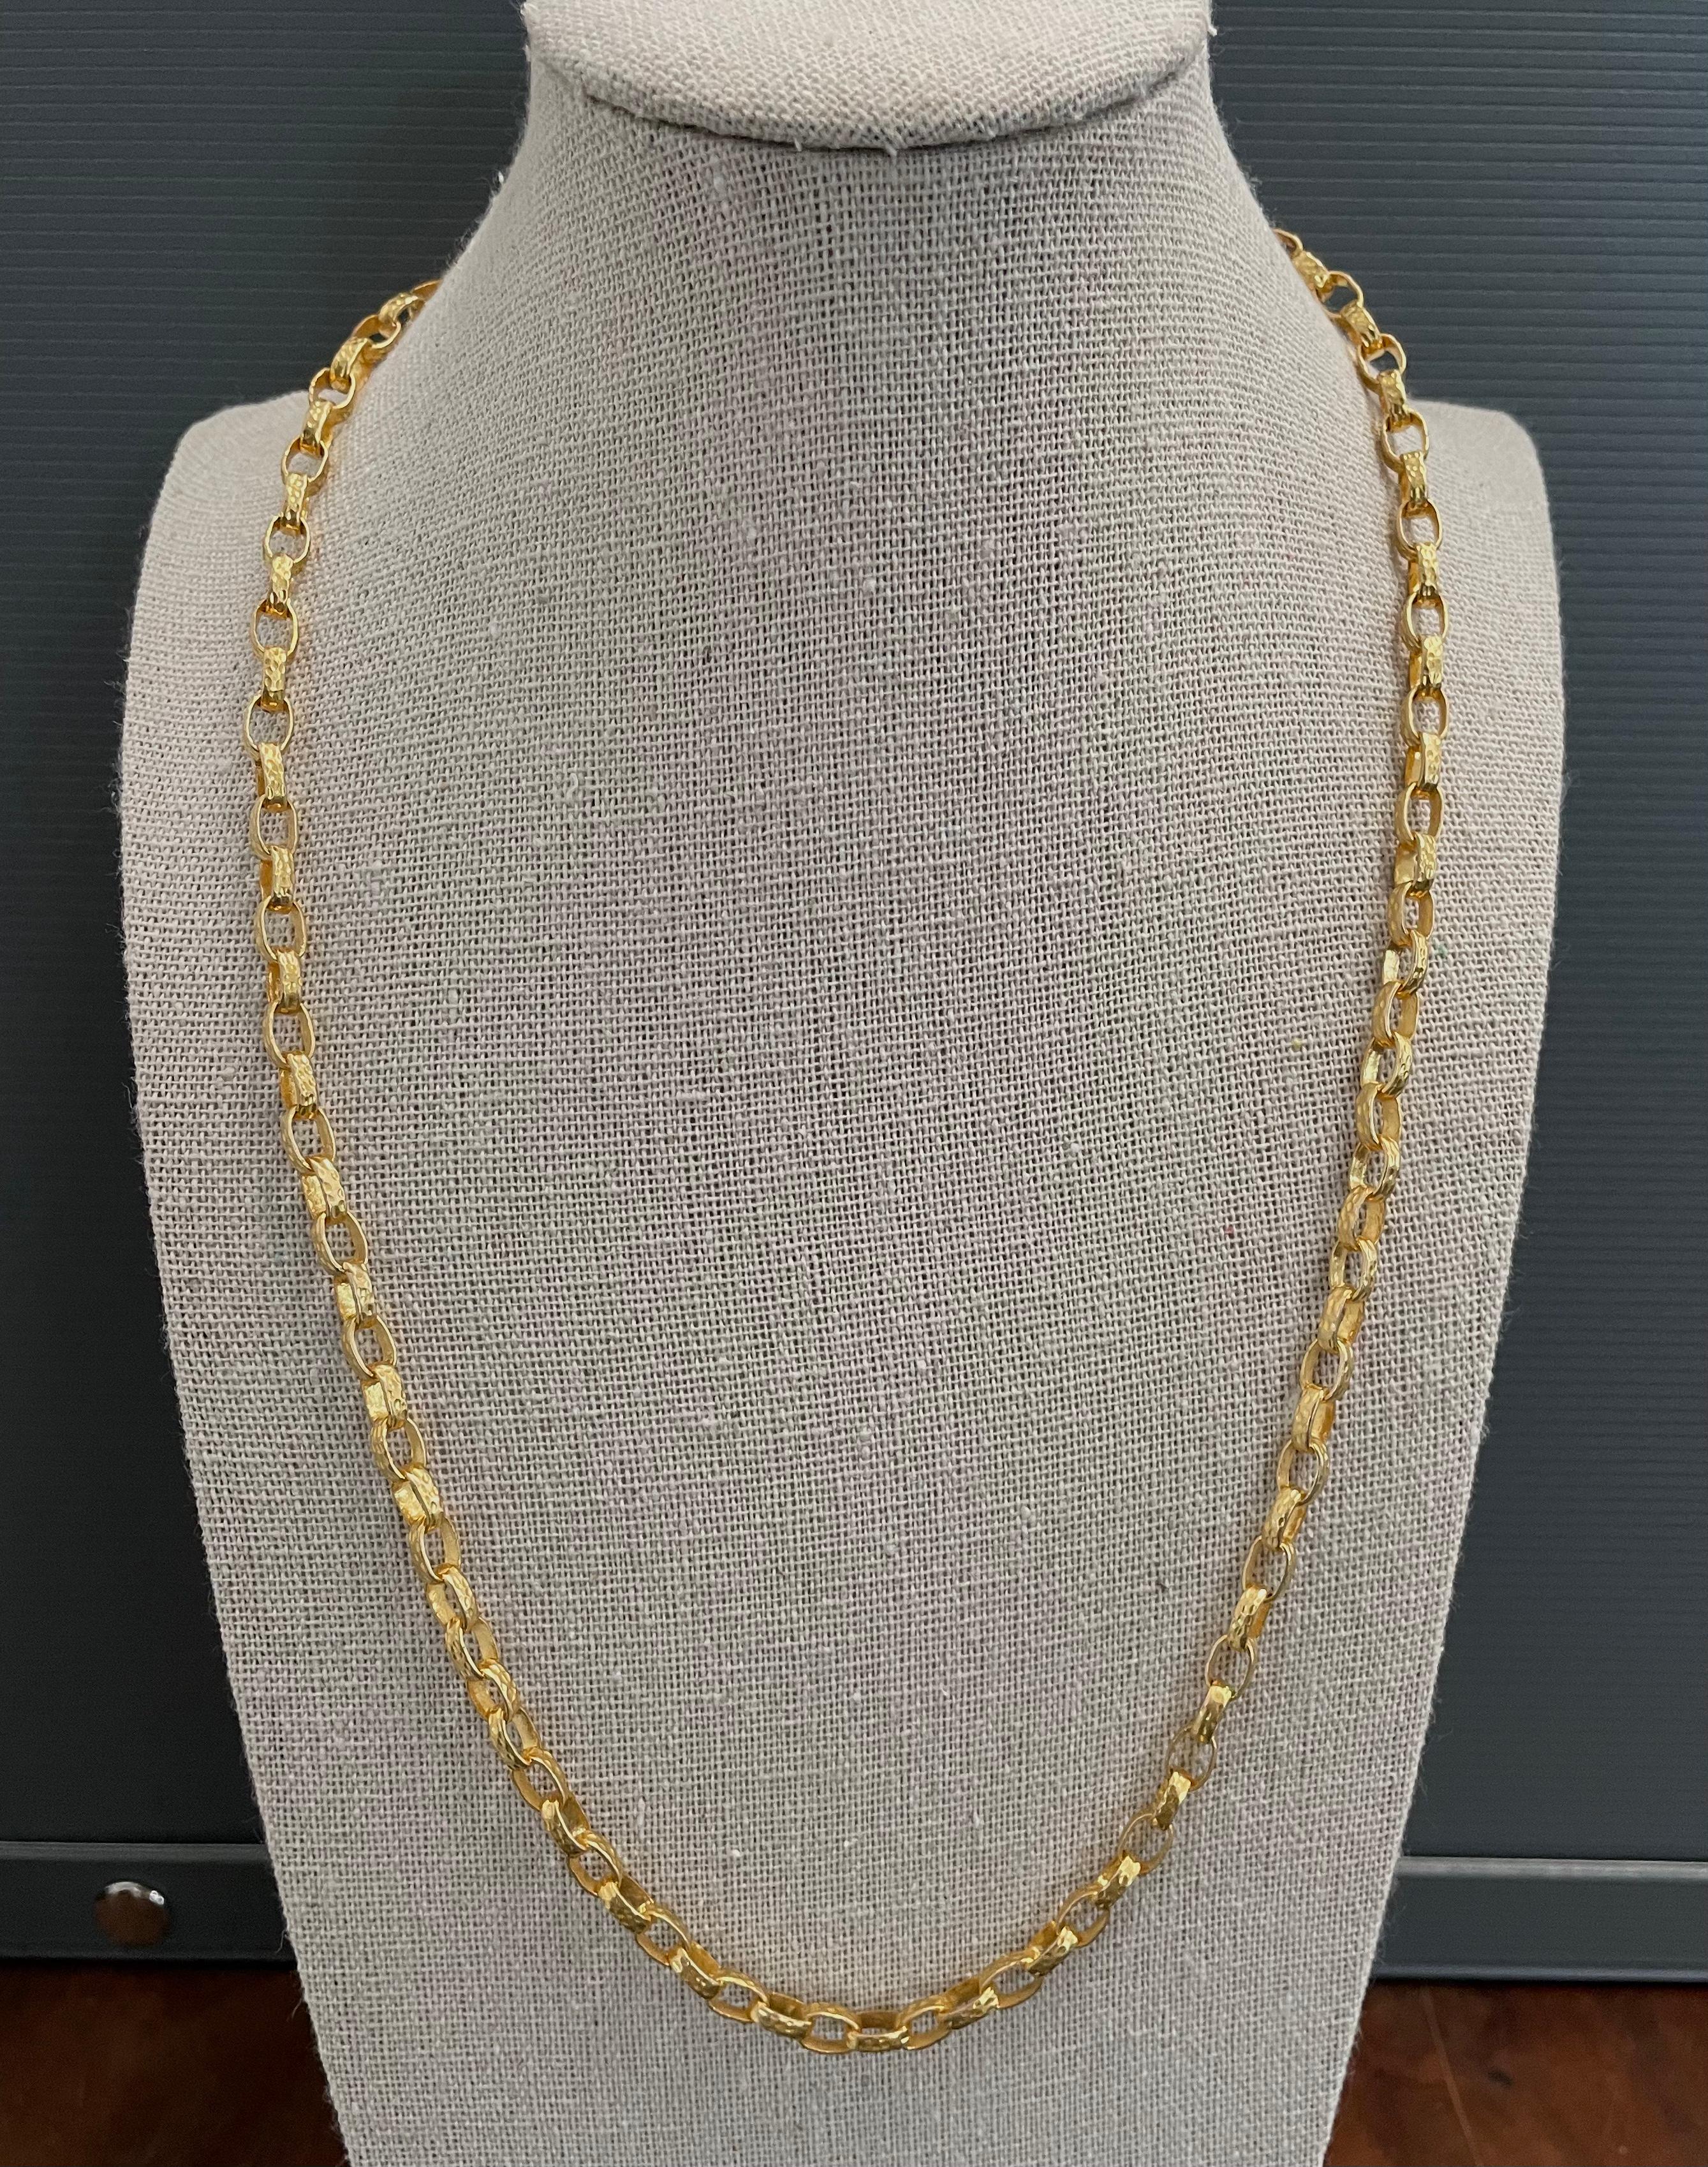 This is our wider and more substantial version of our most popular style handmade gold chain. It has a really nice weight and feel.  31.2 grams.  The hand hammered links are approximately 2.2 mm wide. Rich 18K matte-finish gold color. 